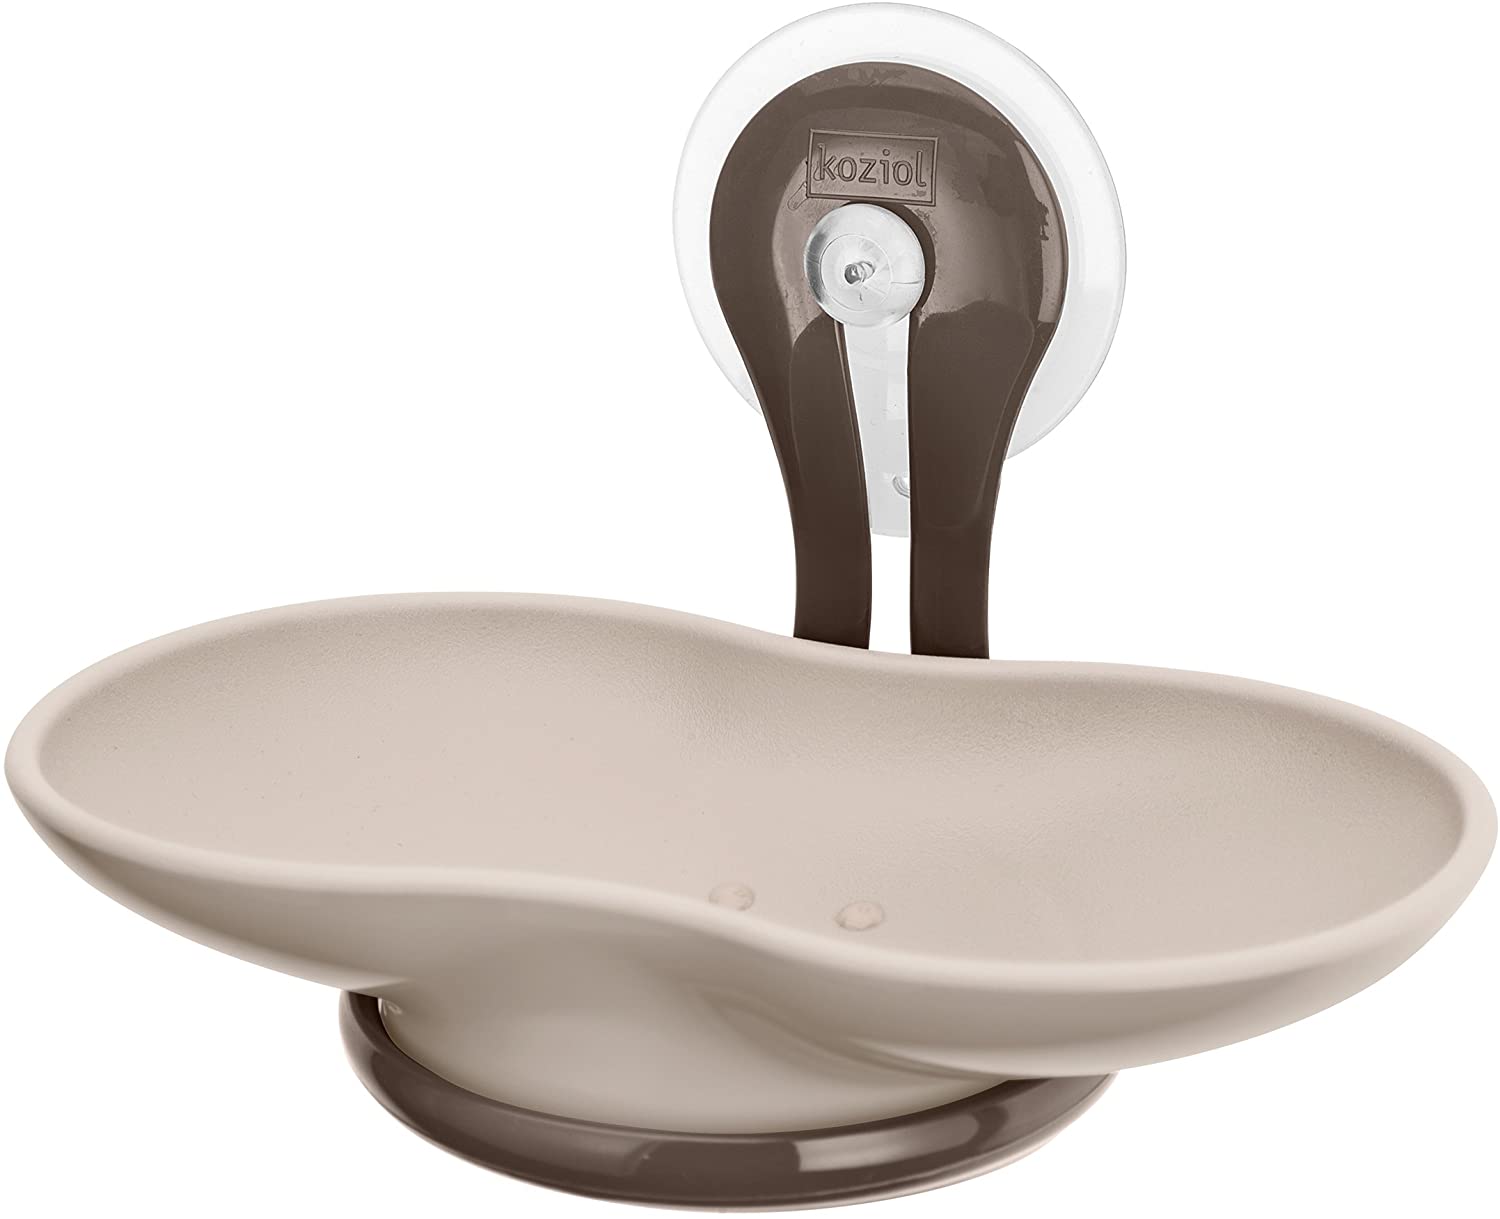 koziol Soap Dish Loop, Plastic, Taupe with Stone, 9 x 14 x 9 cm